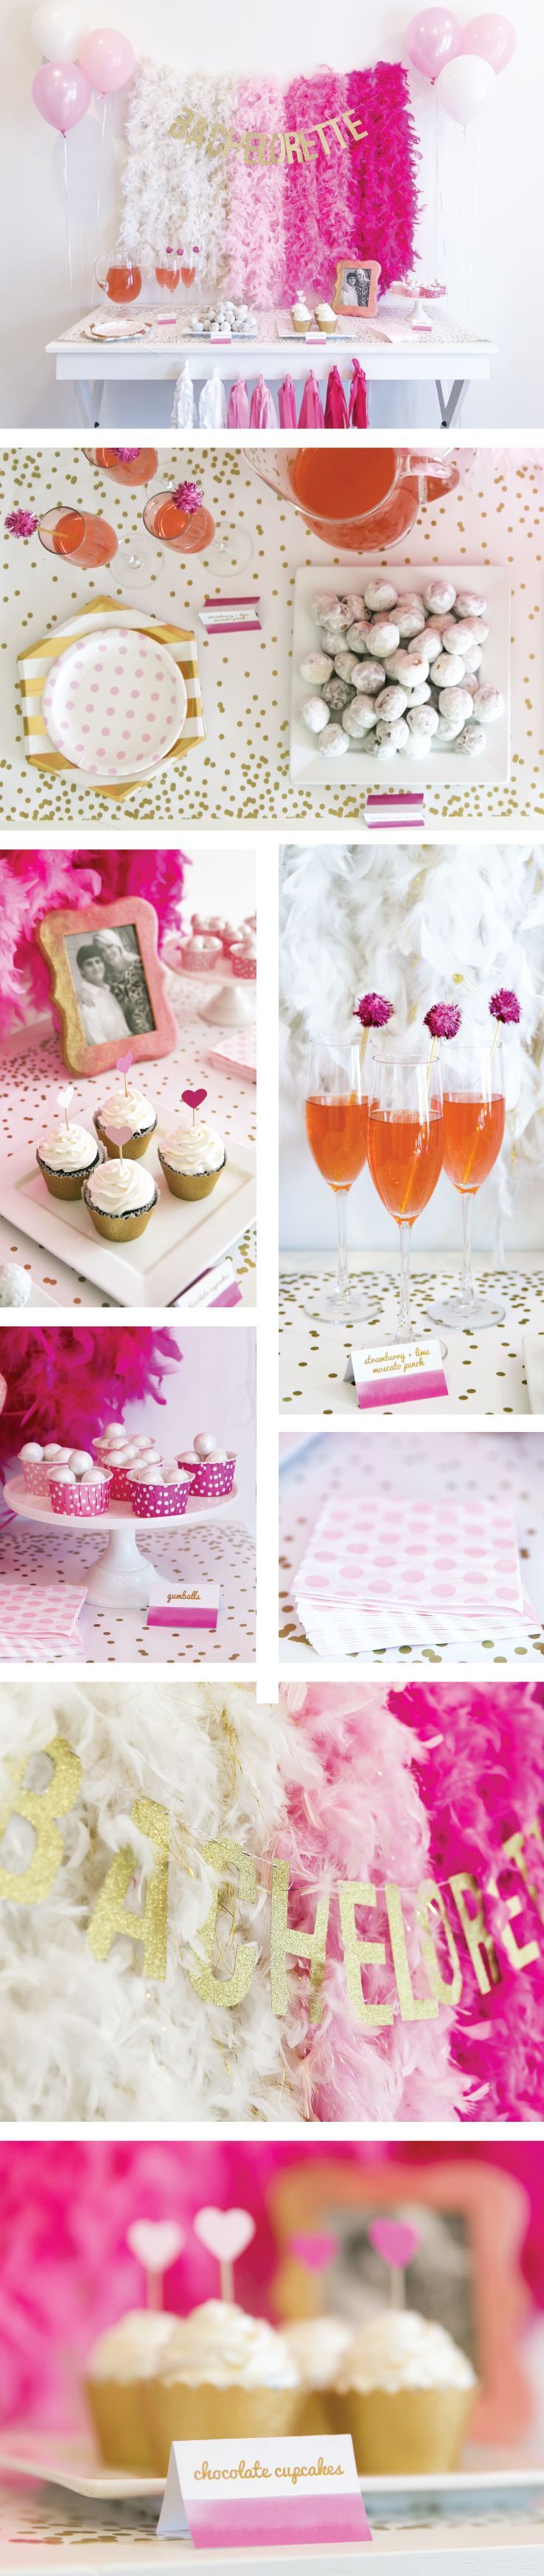 Bachelorette Party Kit | Pink and gold bachelorette party | bachelorette party supplies and decor